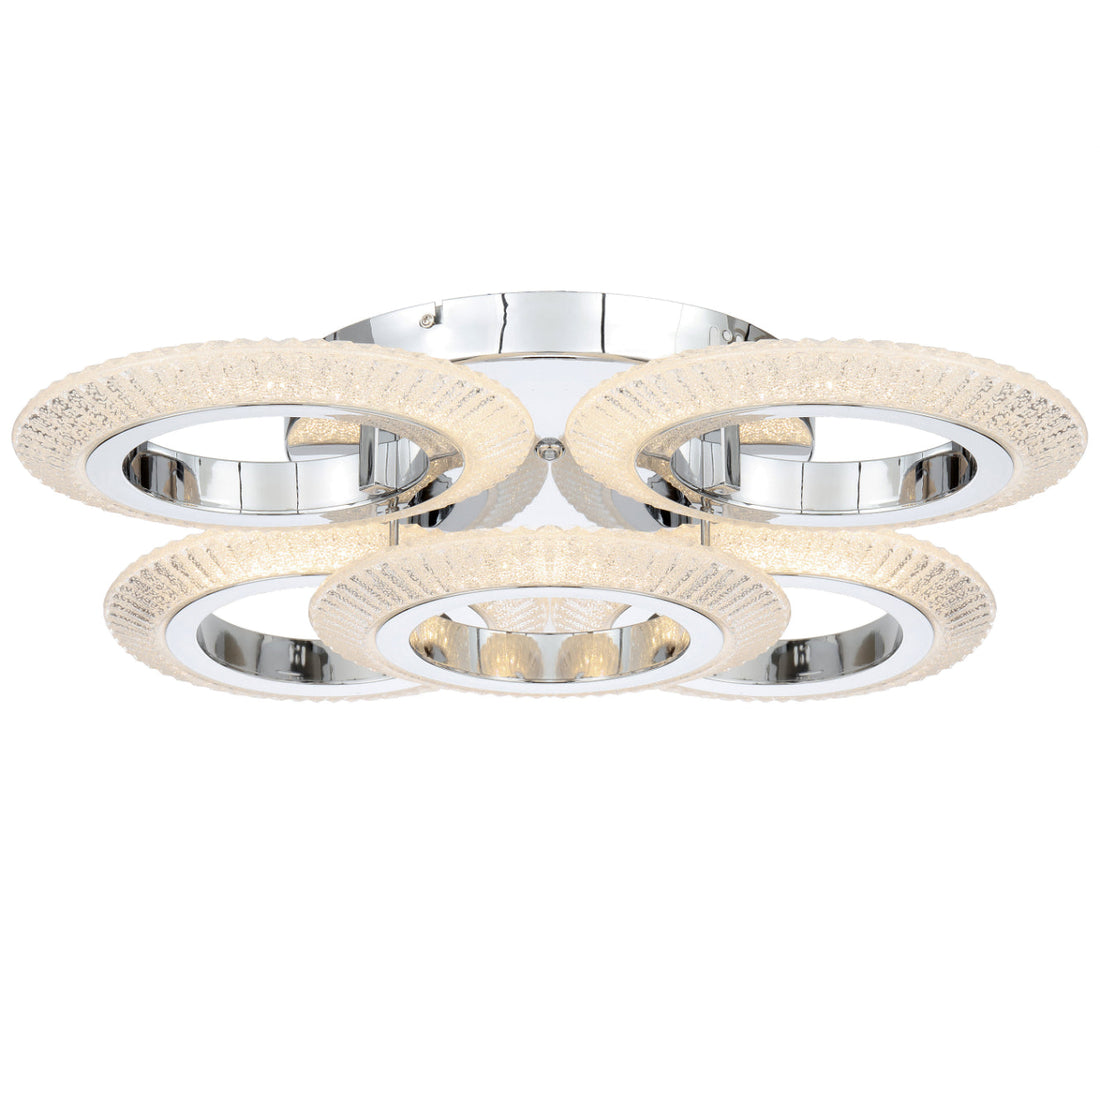 Luna 5 Ring Crystal-Look LED Tri-Colour 50w Close to Ceiling